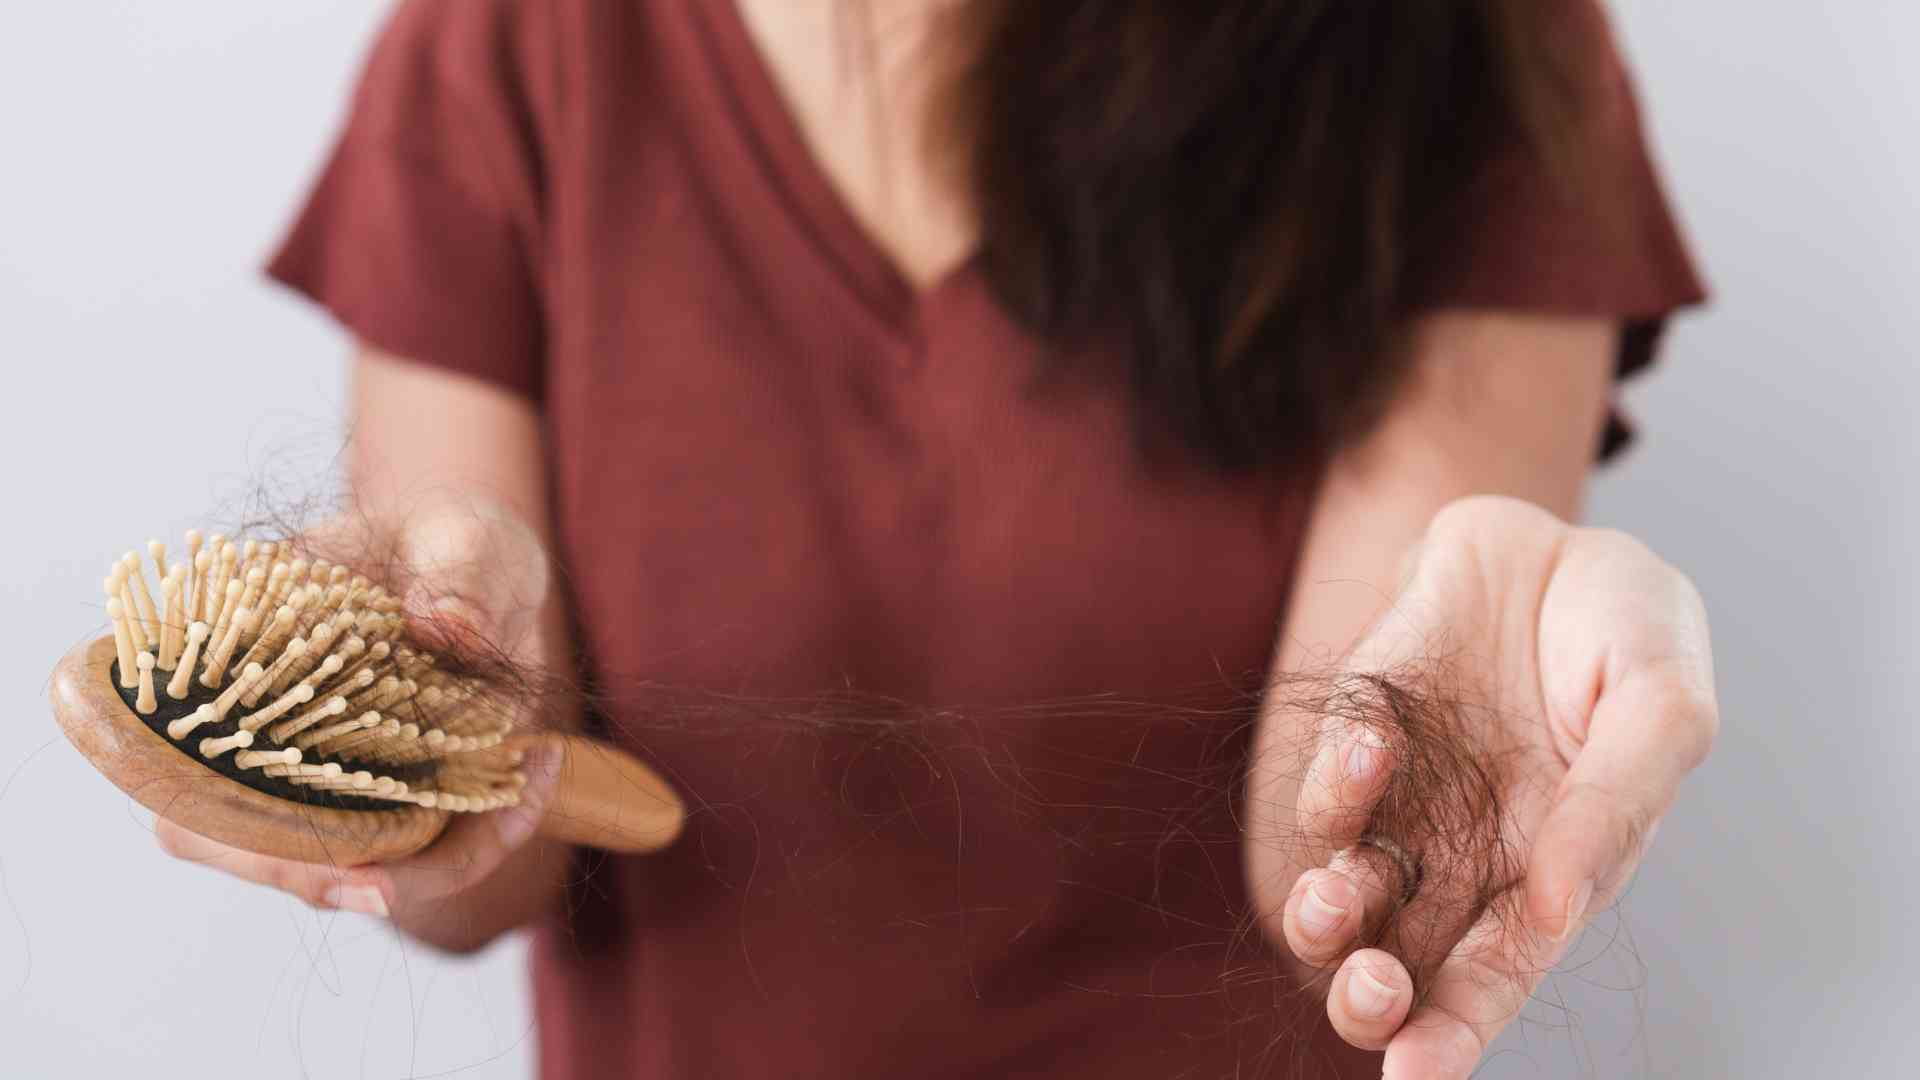 What are some common misconceptions about hair loss